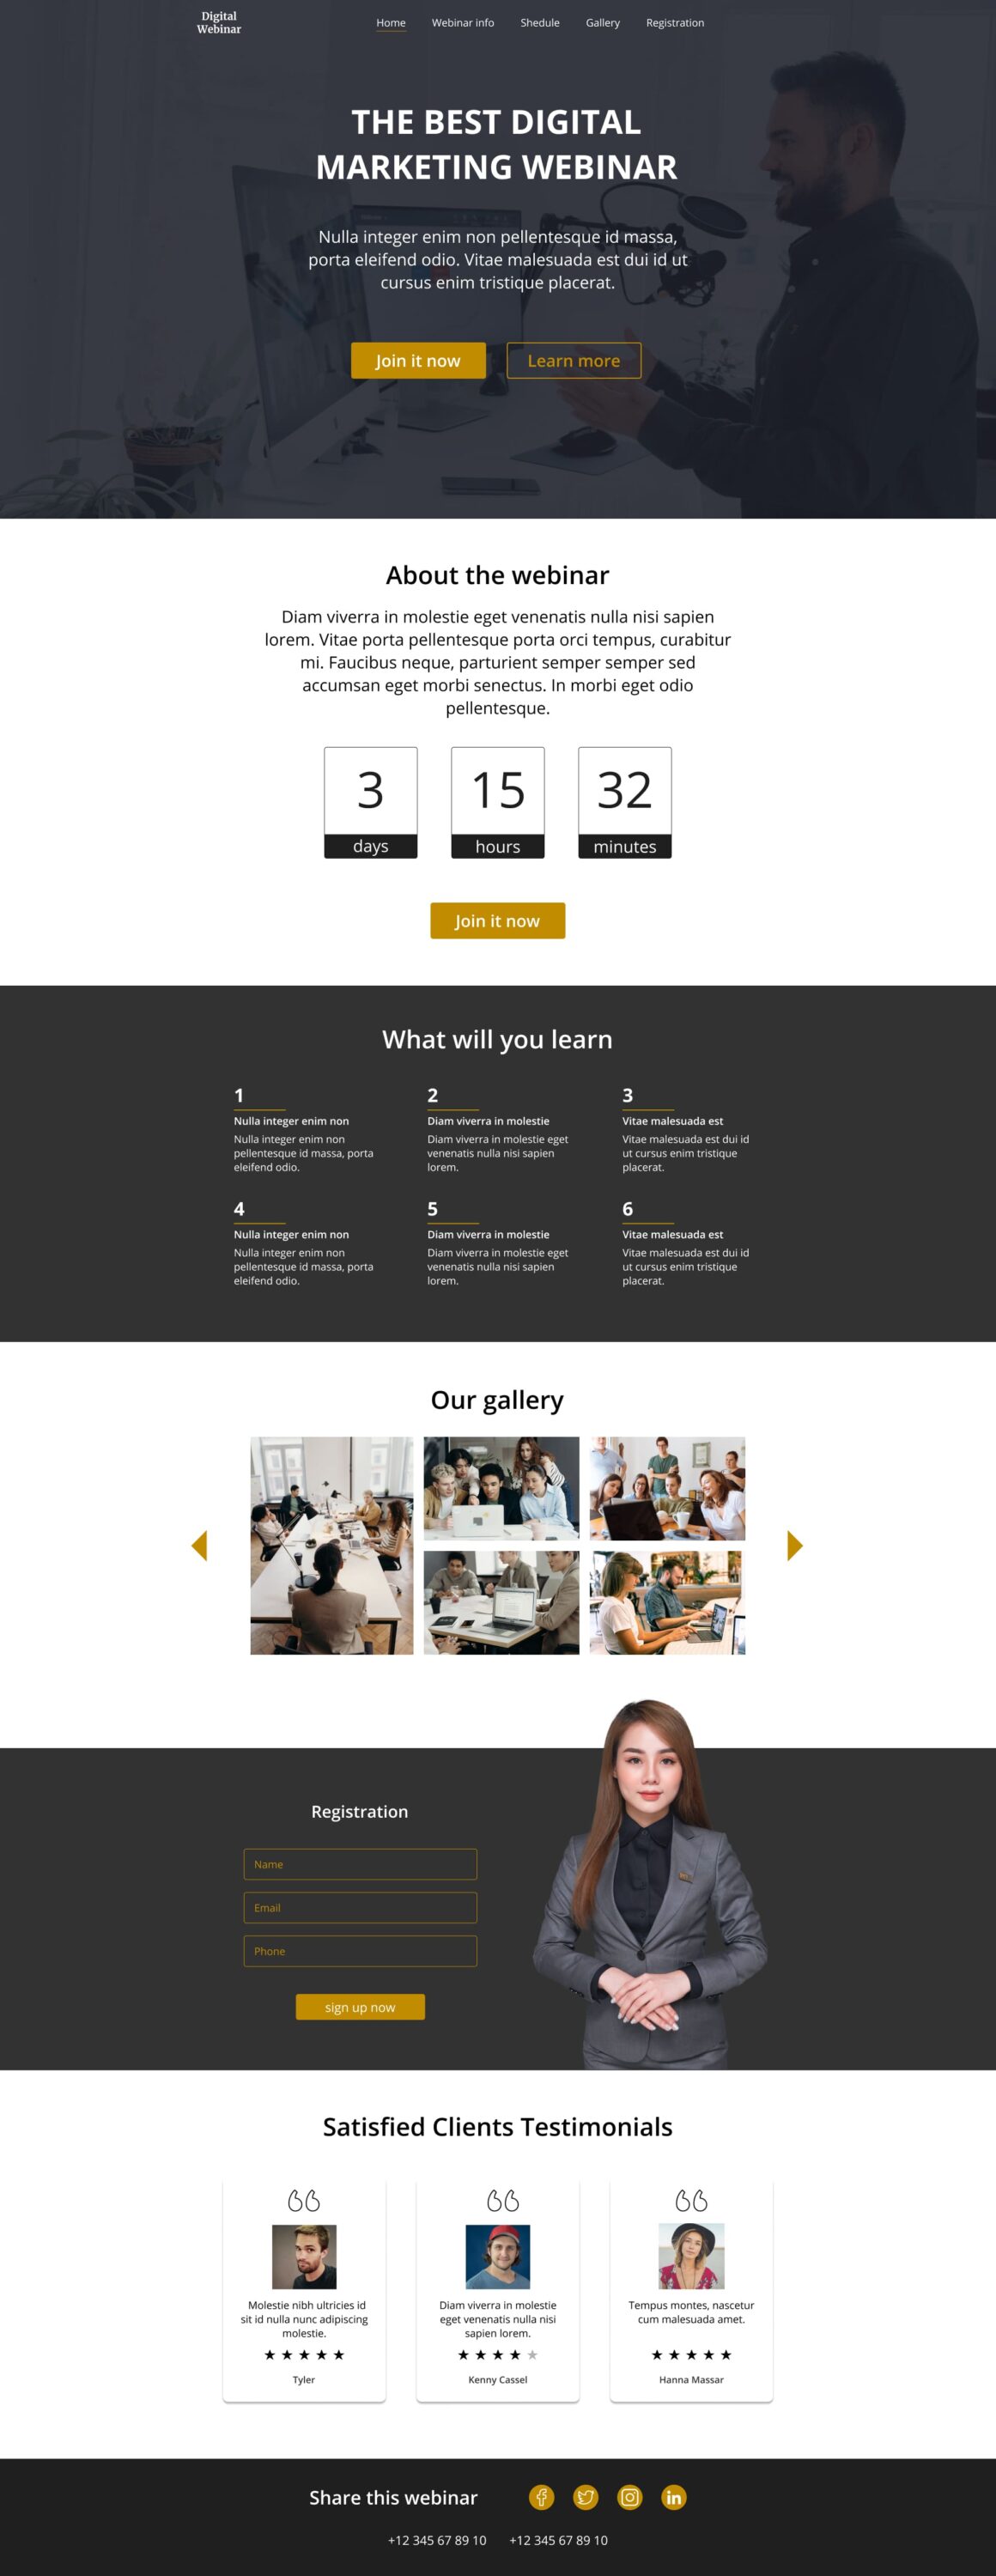 Strong mockup for business page.